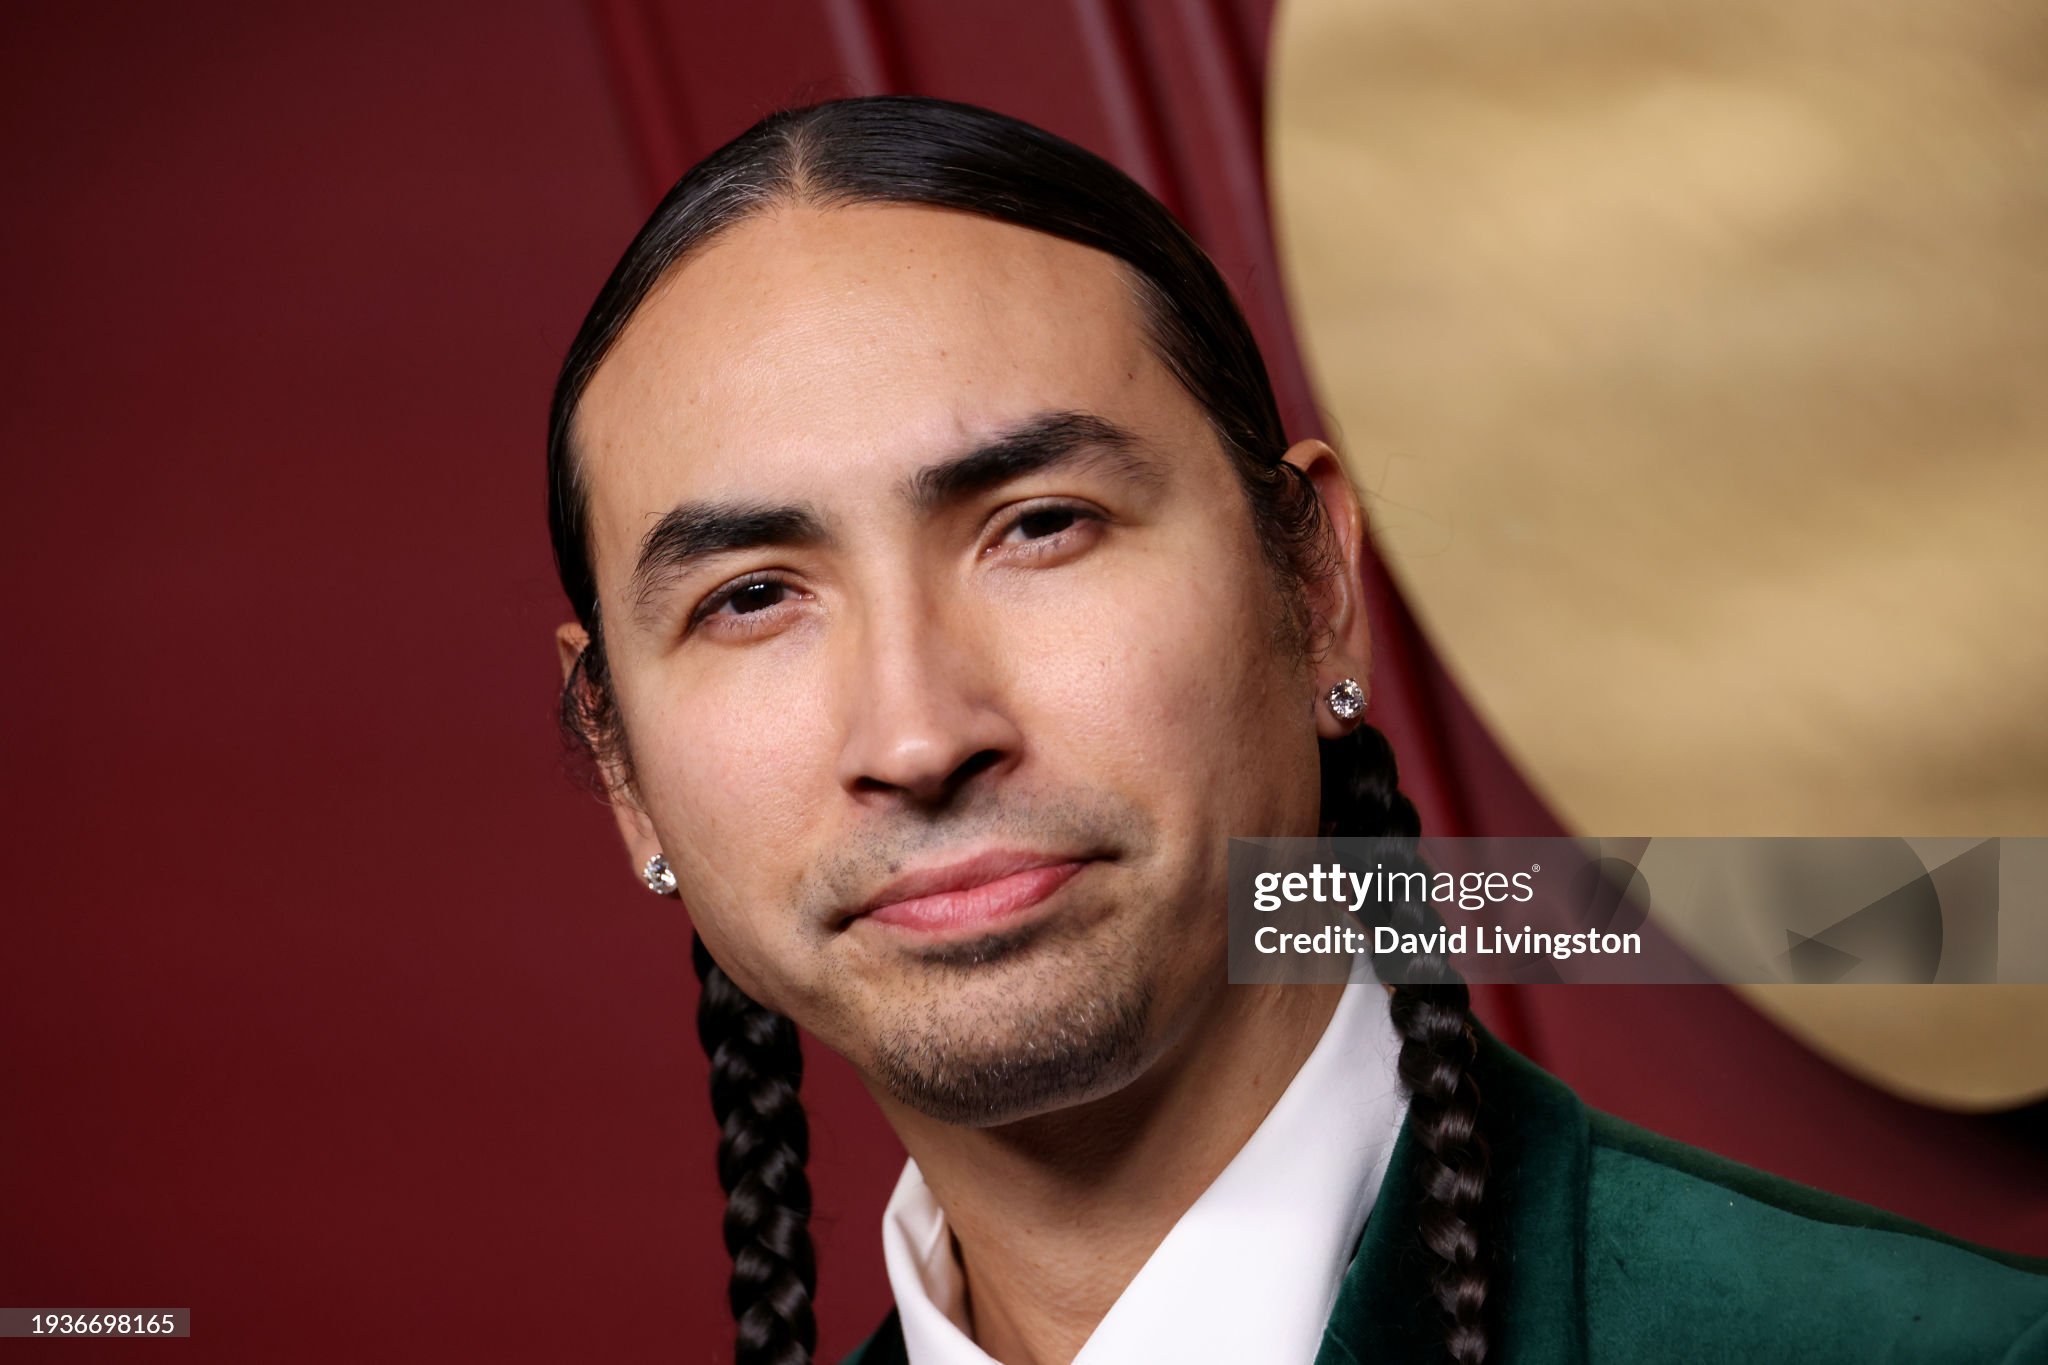 gettyimages-1936698165-2048x2048.jpg